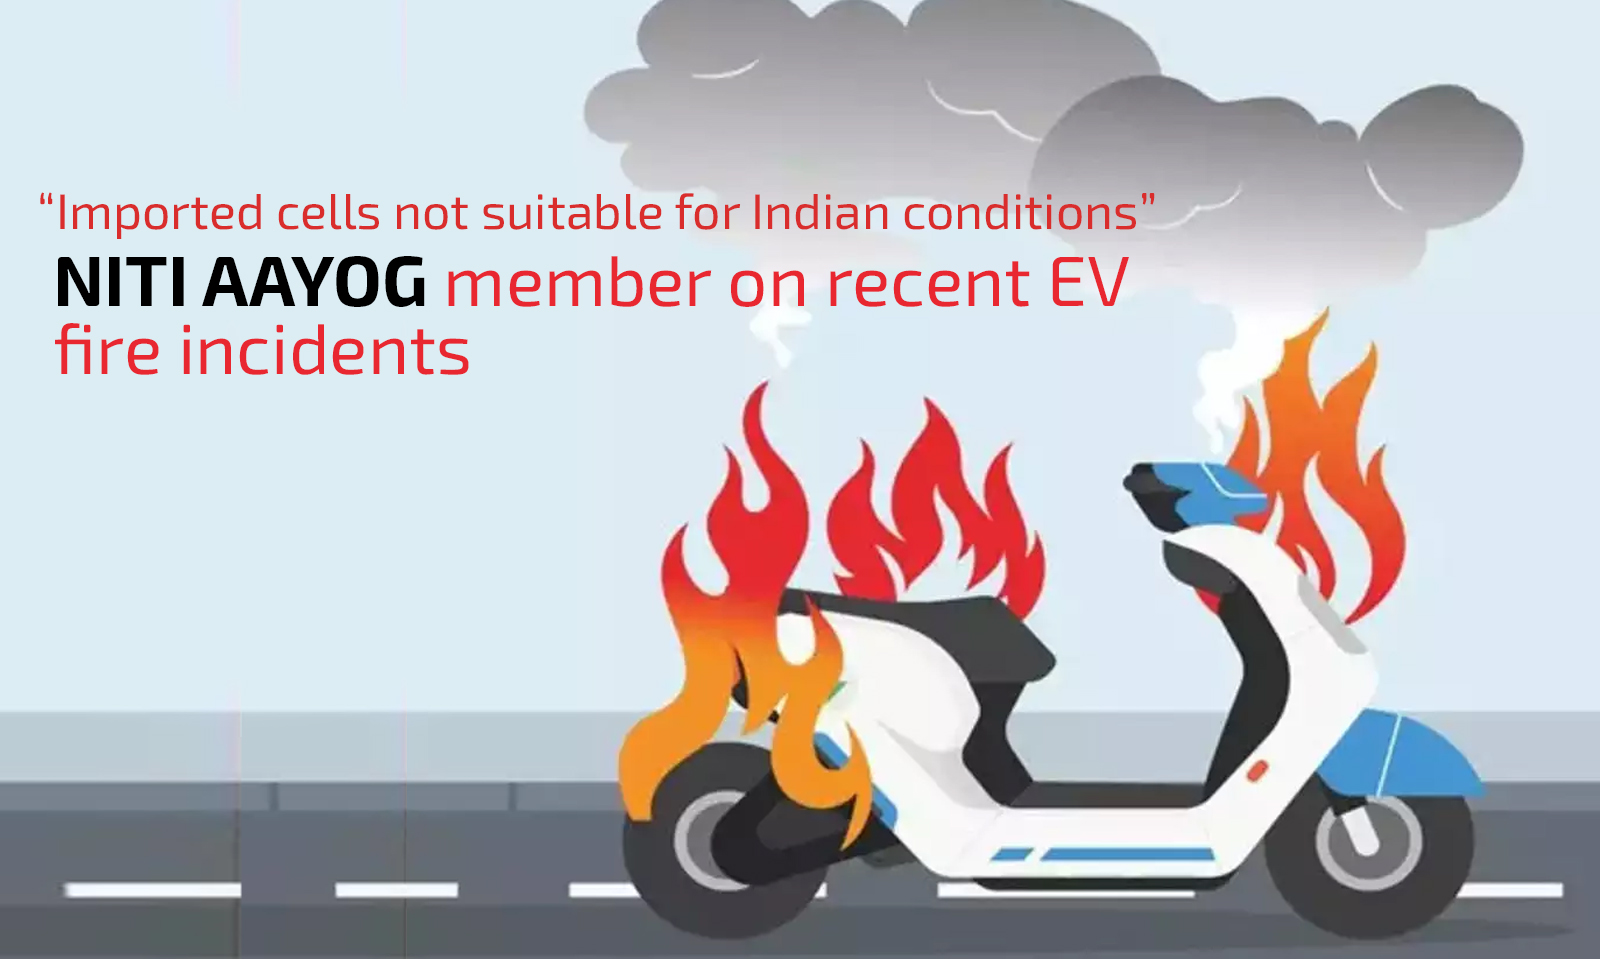 Imported cells not suitable for Indian conditions: Niti Aayog member on recent EV fire incidents